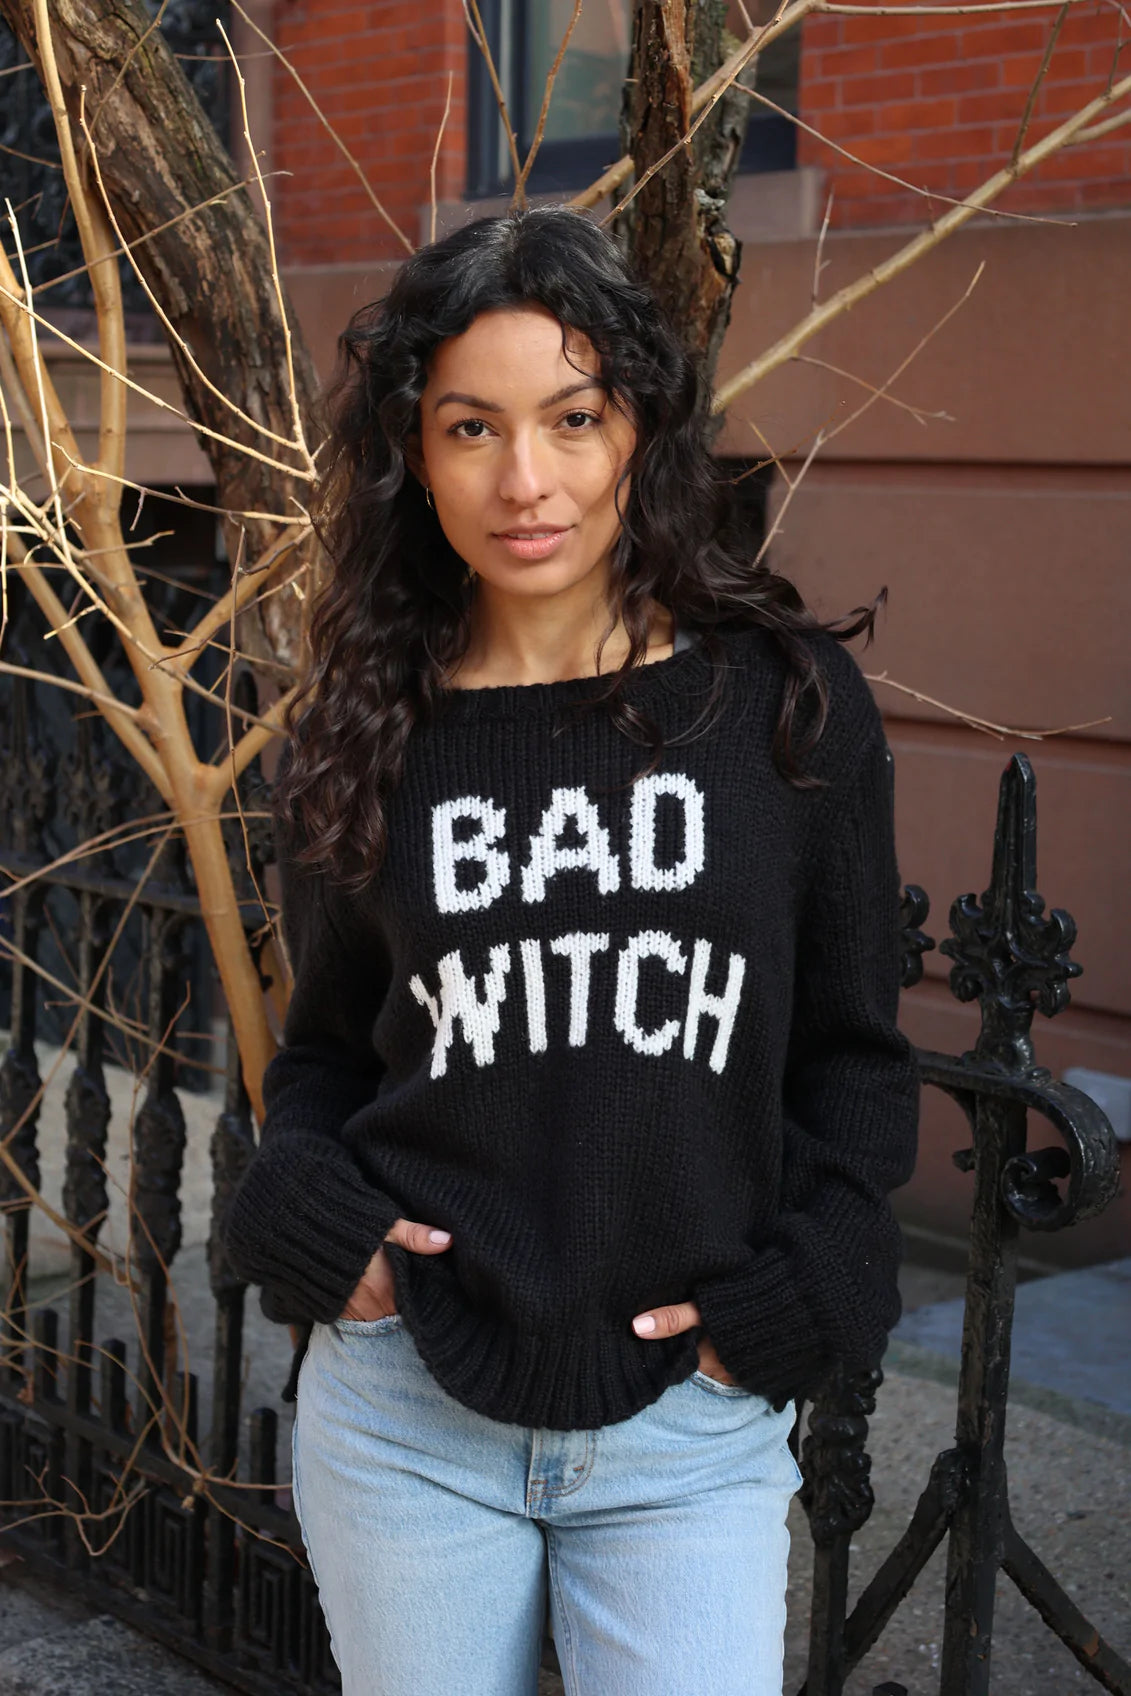 Bad Witch Crew In Black/Pure Snow